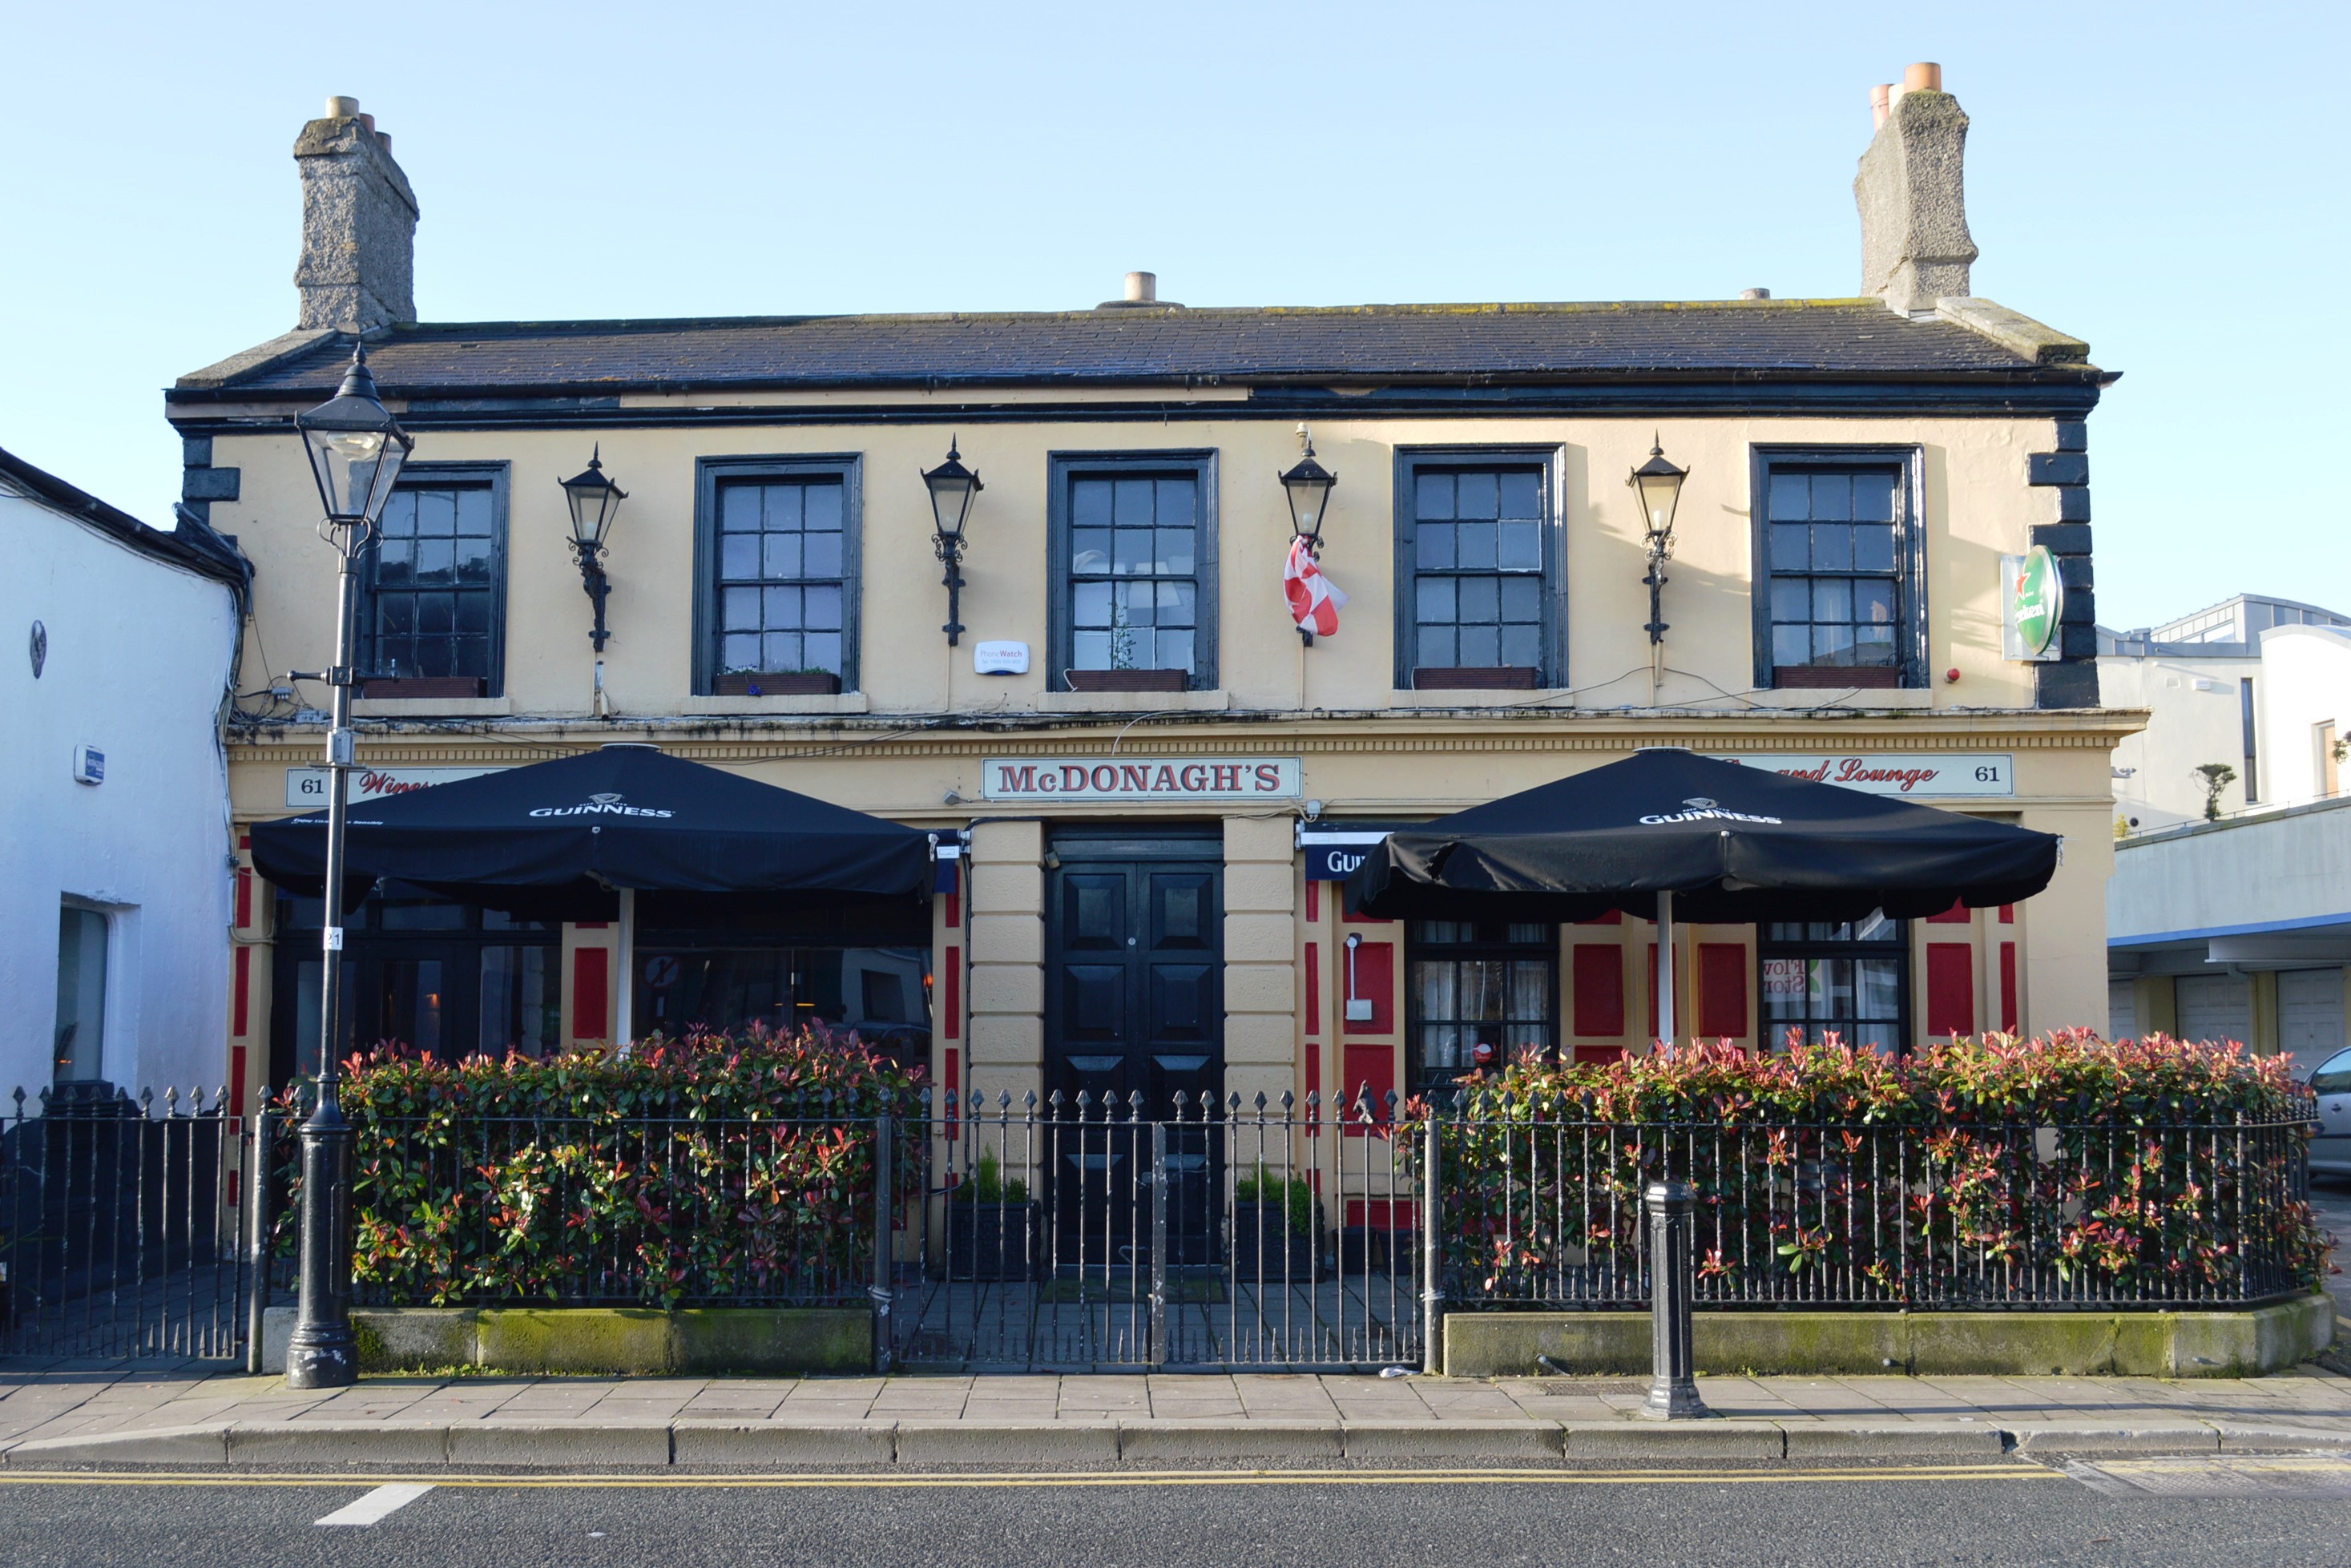 McDonagh’s in Dalkey – one of the high-profile pubs sold by Morrisseys in 2016.